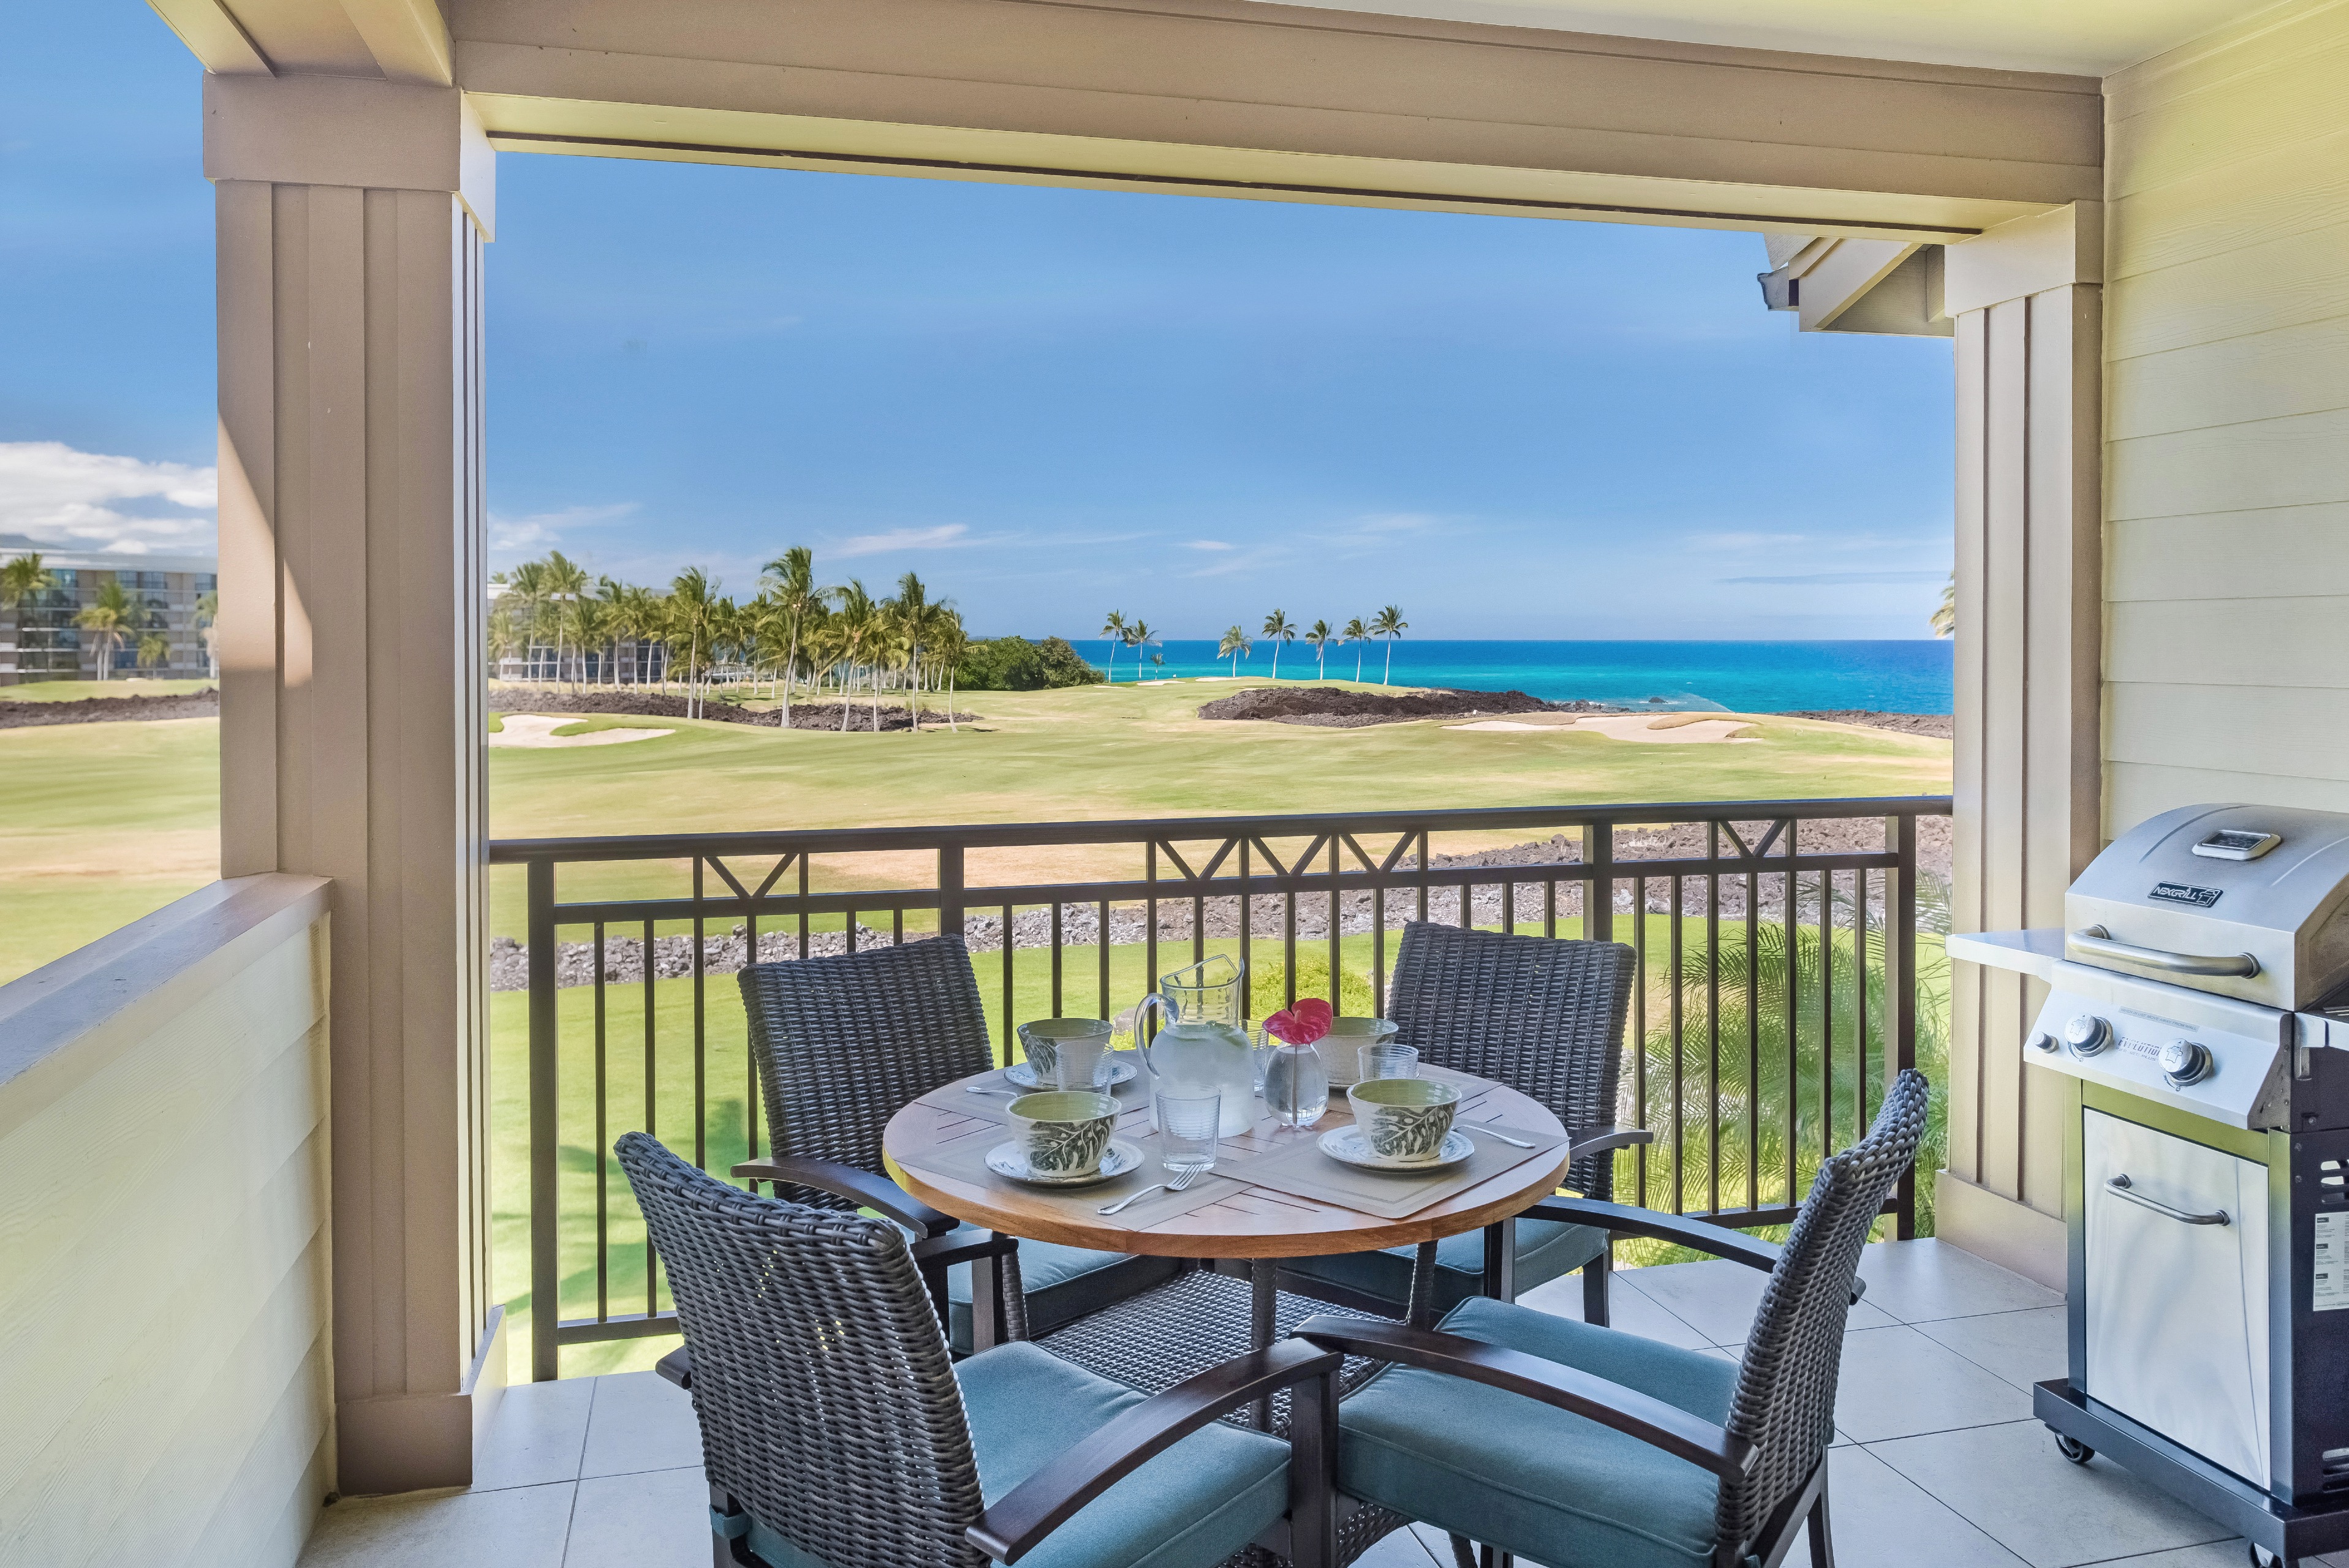 Stunning ocean and sunset views from your lanai!